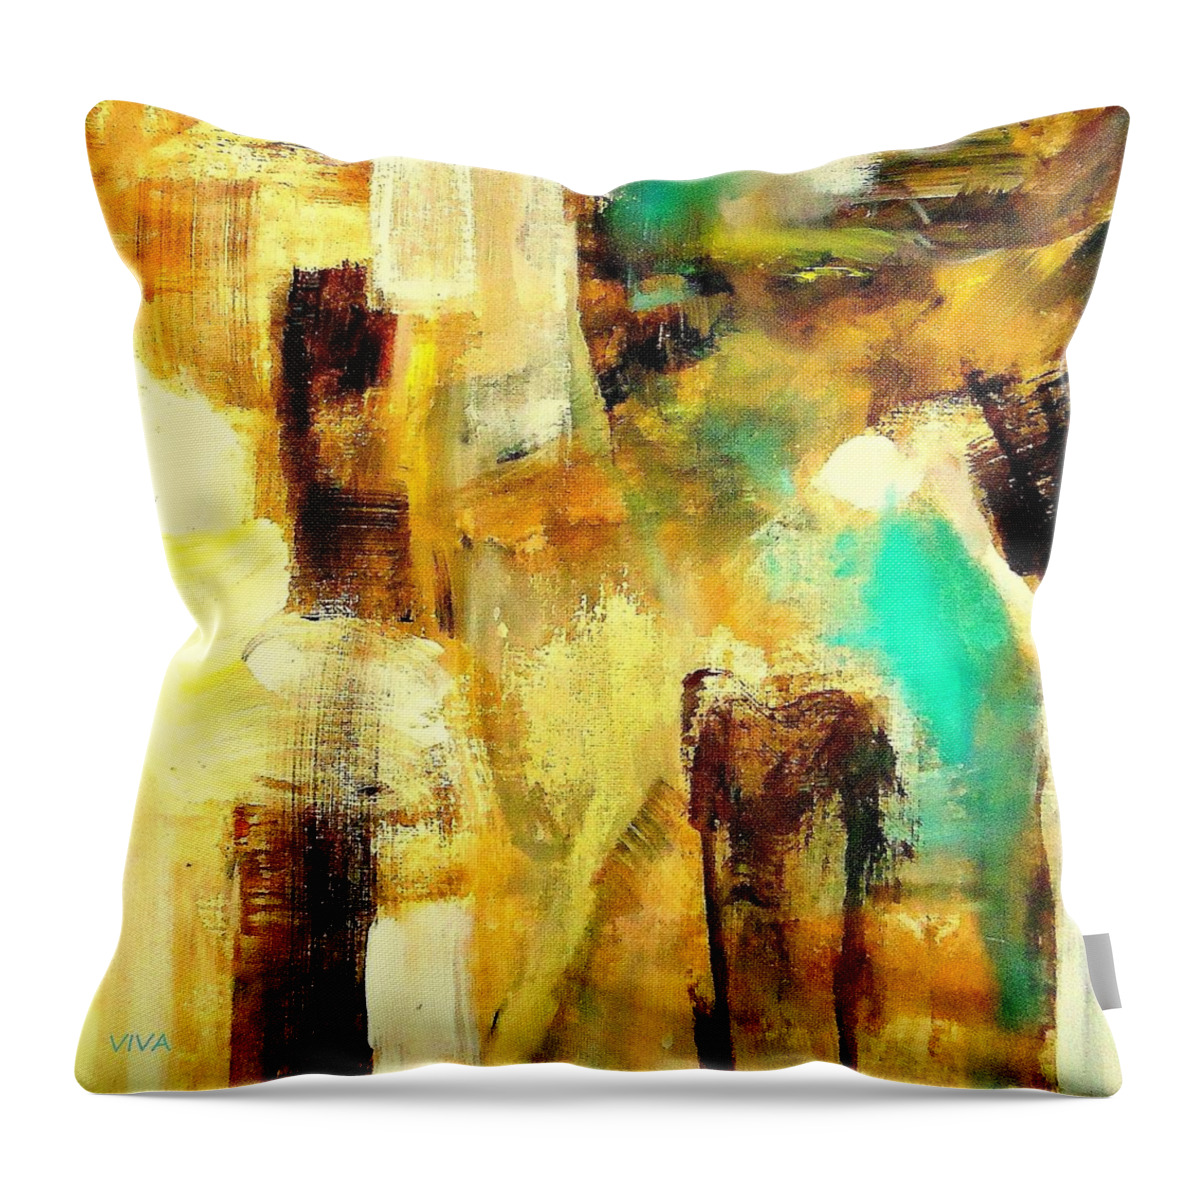 Viva Throw Pillow featuring the painting Untitled - VIVA Anderson by VIVA Anderson